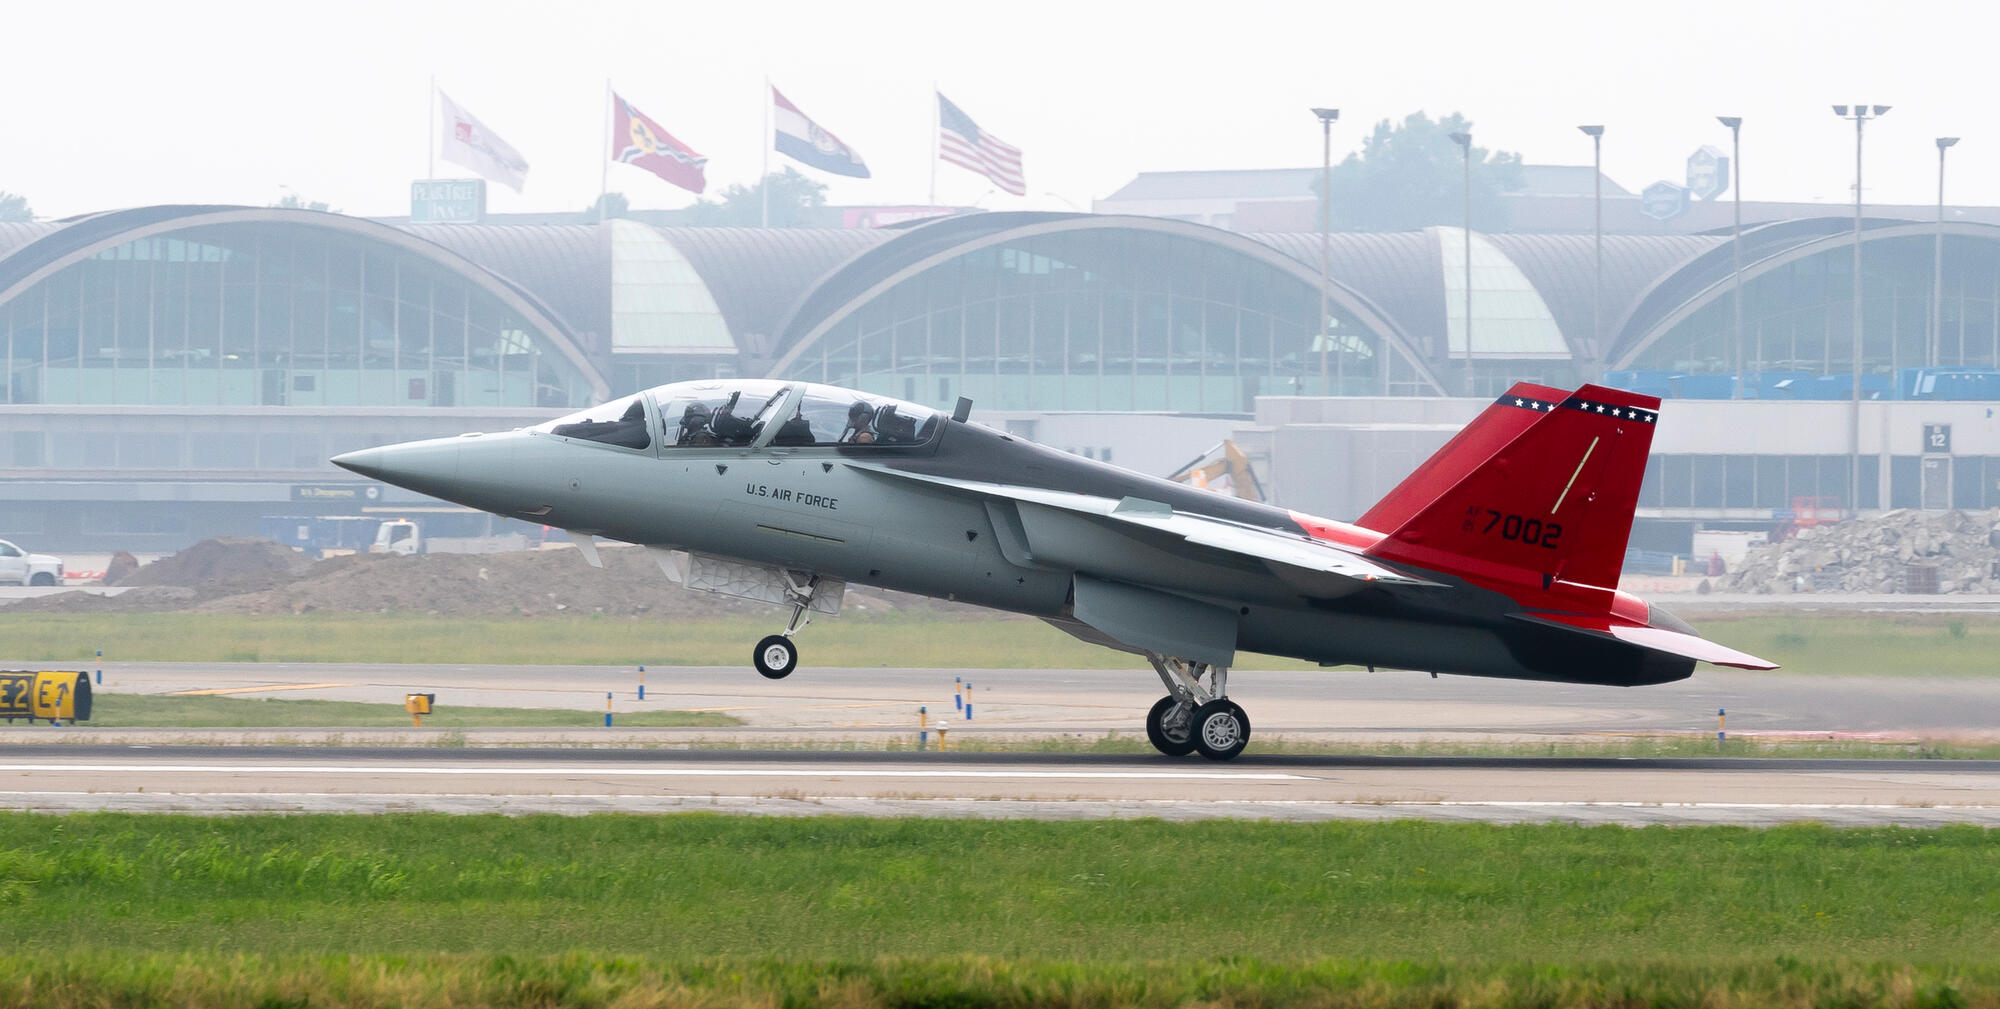 T-7A Red Hawk Engineering and Manufacturing Development First Flight, St. Louis Lambert International Airport - St. Louis, MO. MSF23-030 Series.